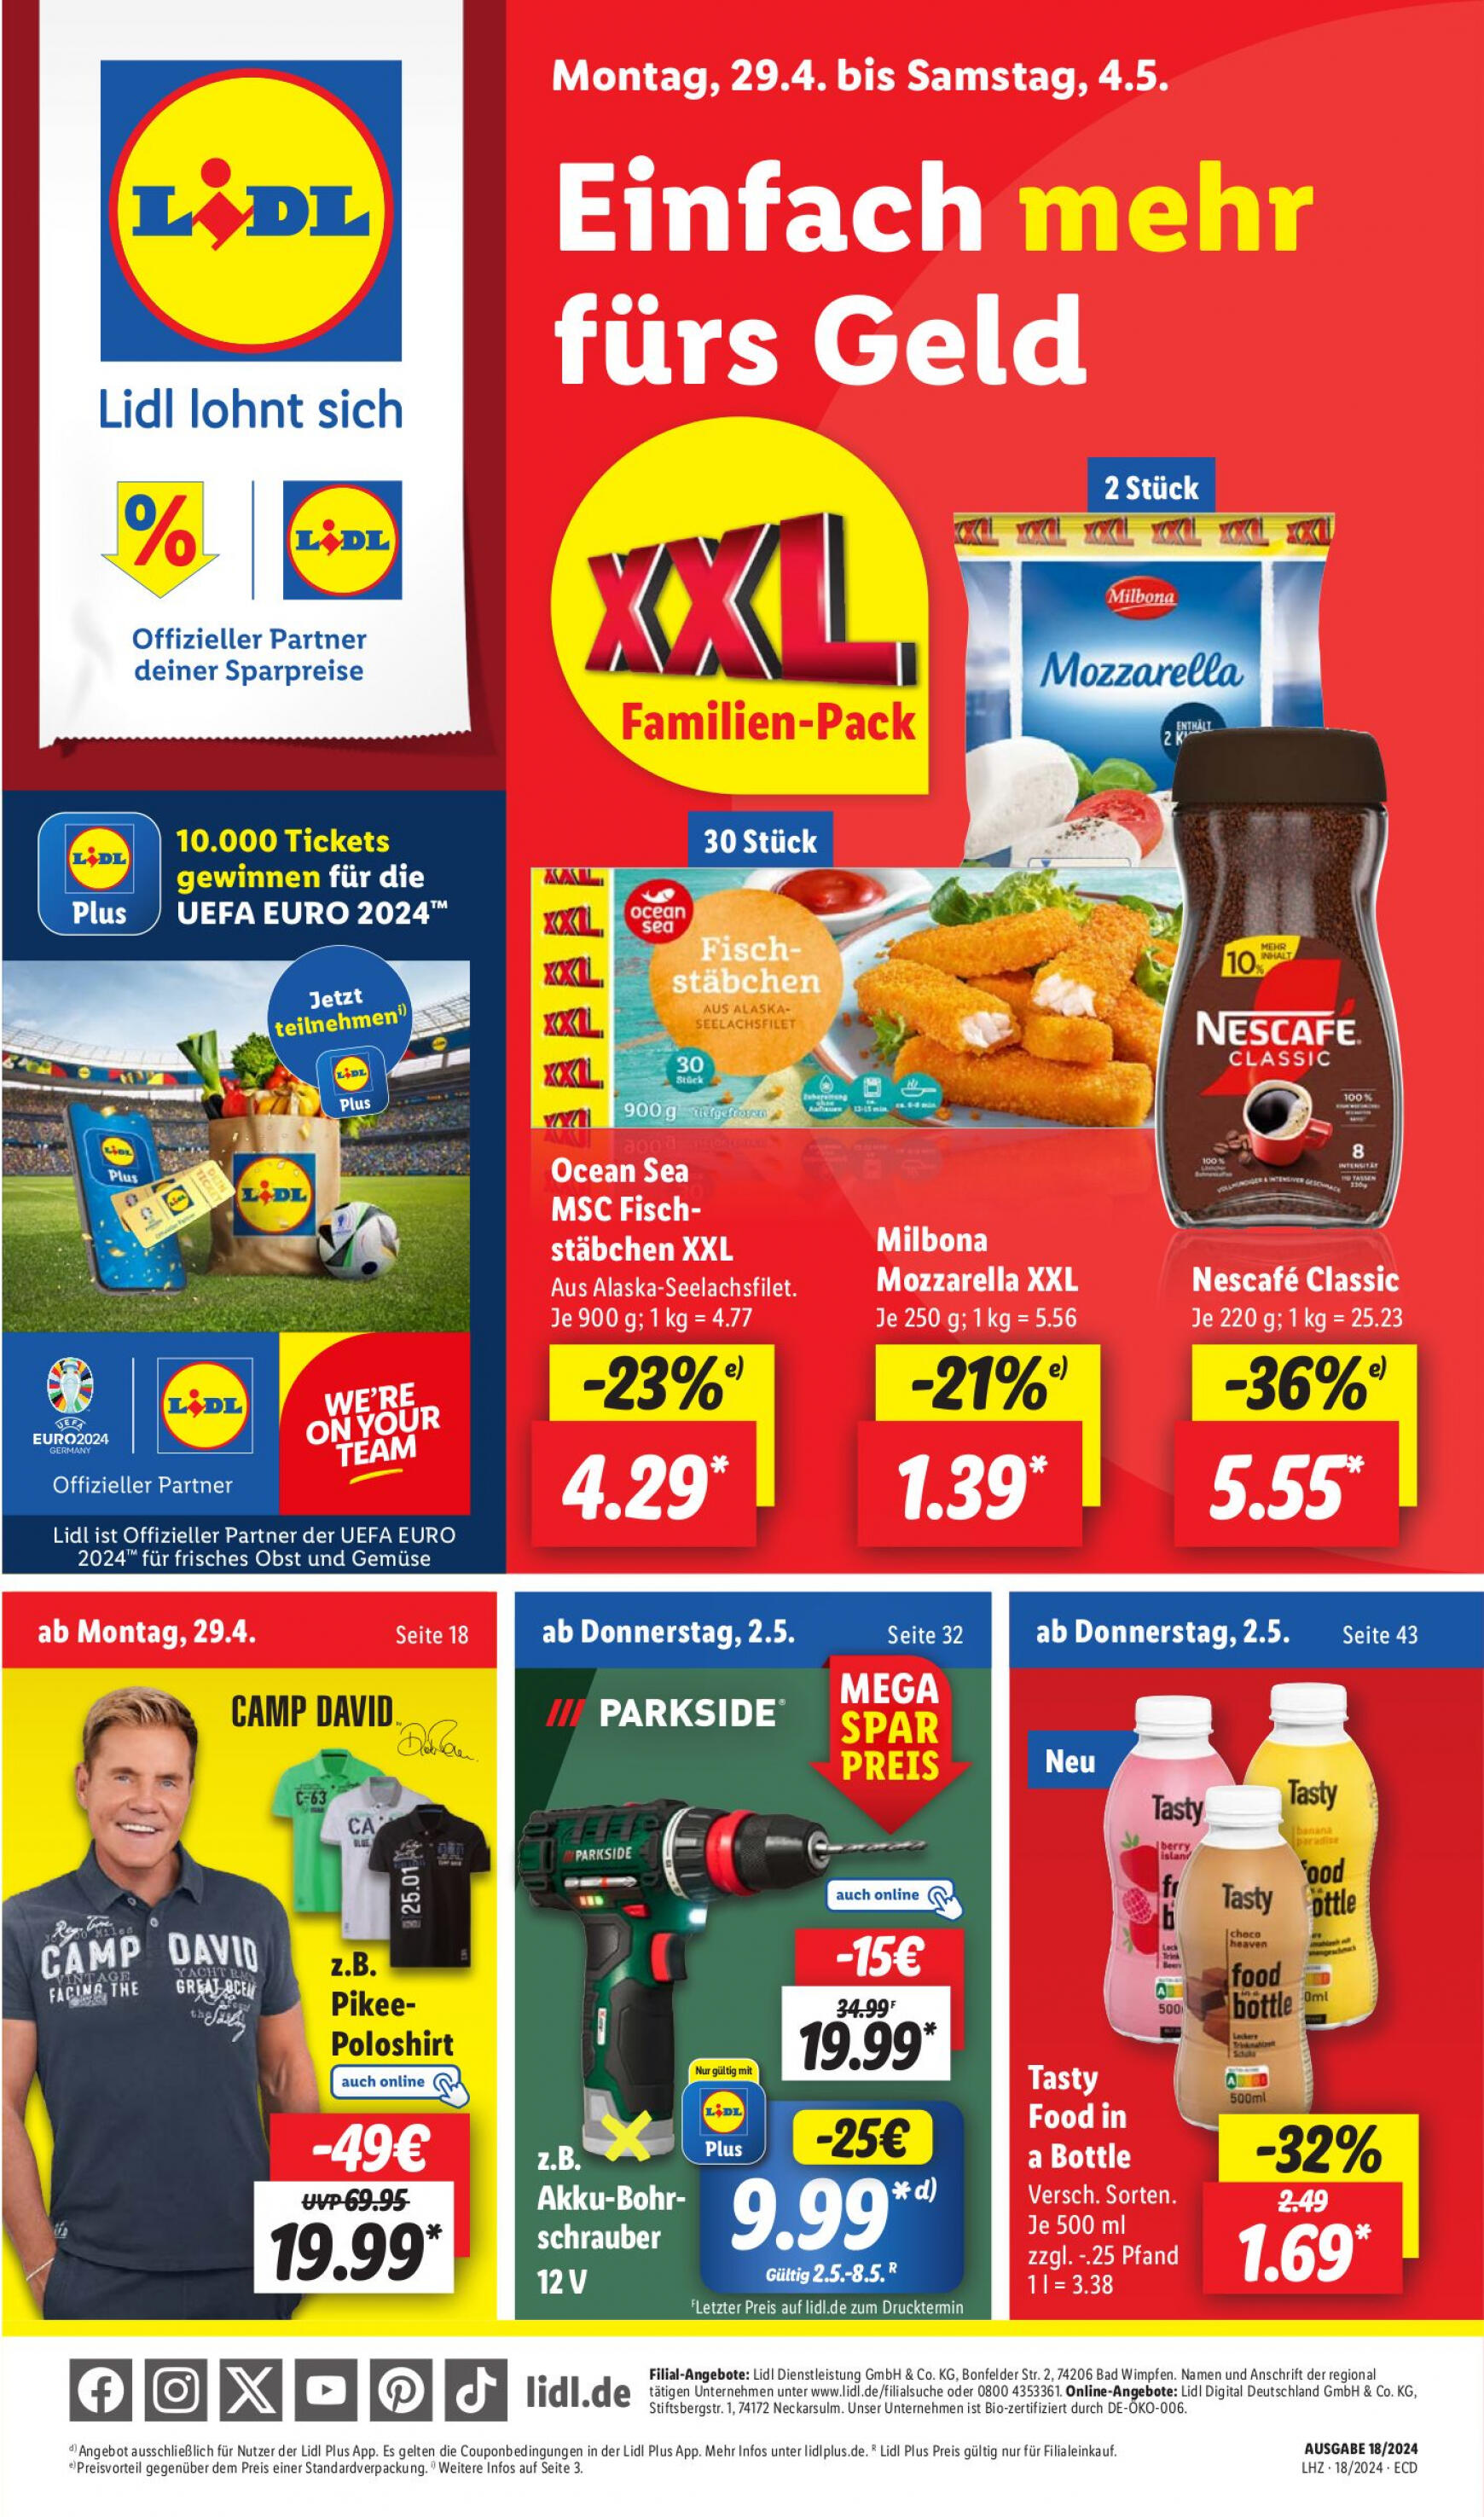 lidl - Flyer Lidl aktuell 29.04. - 04.05. - page: 1